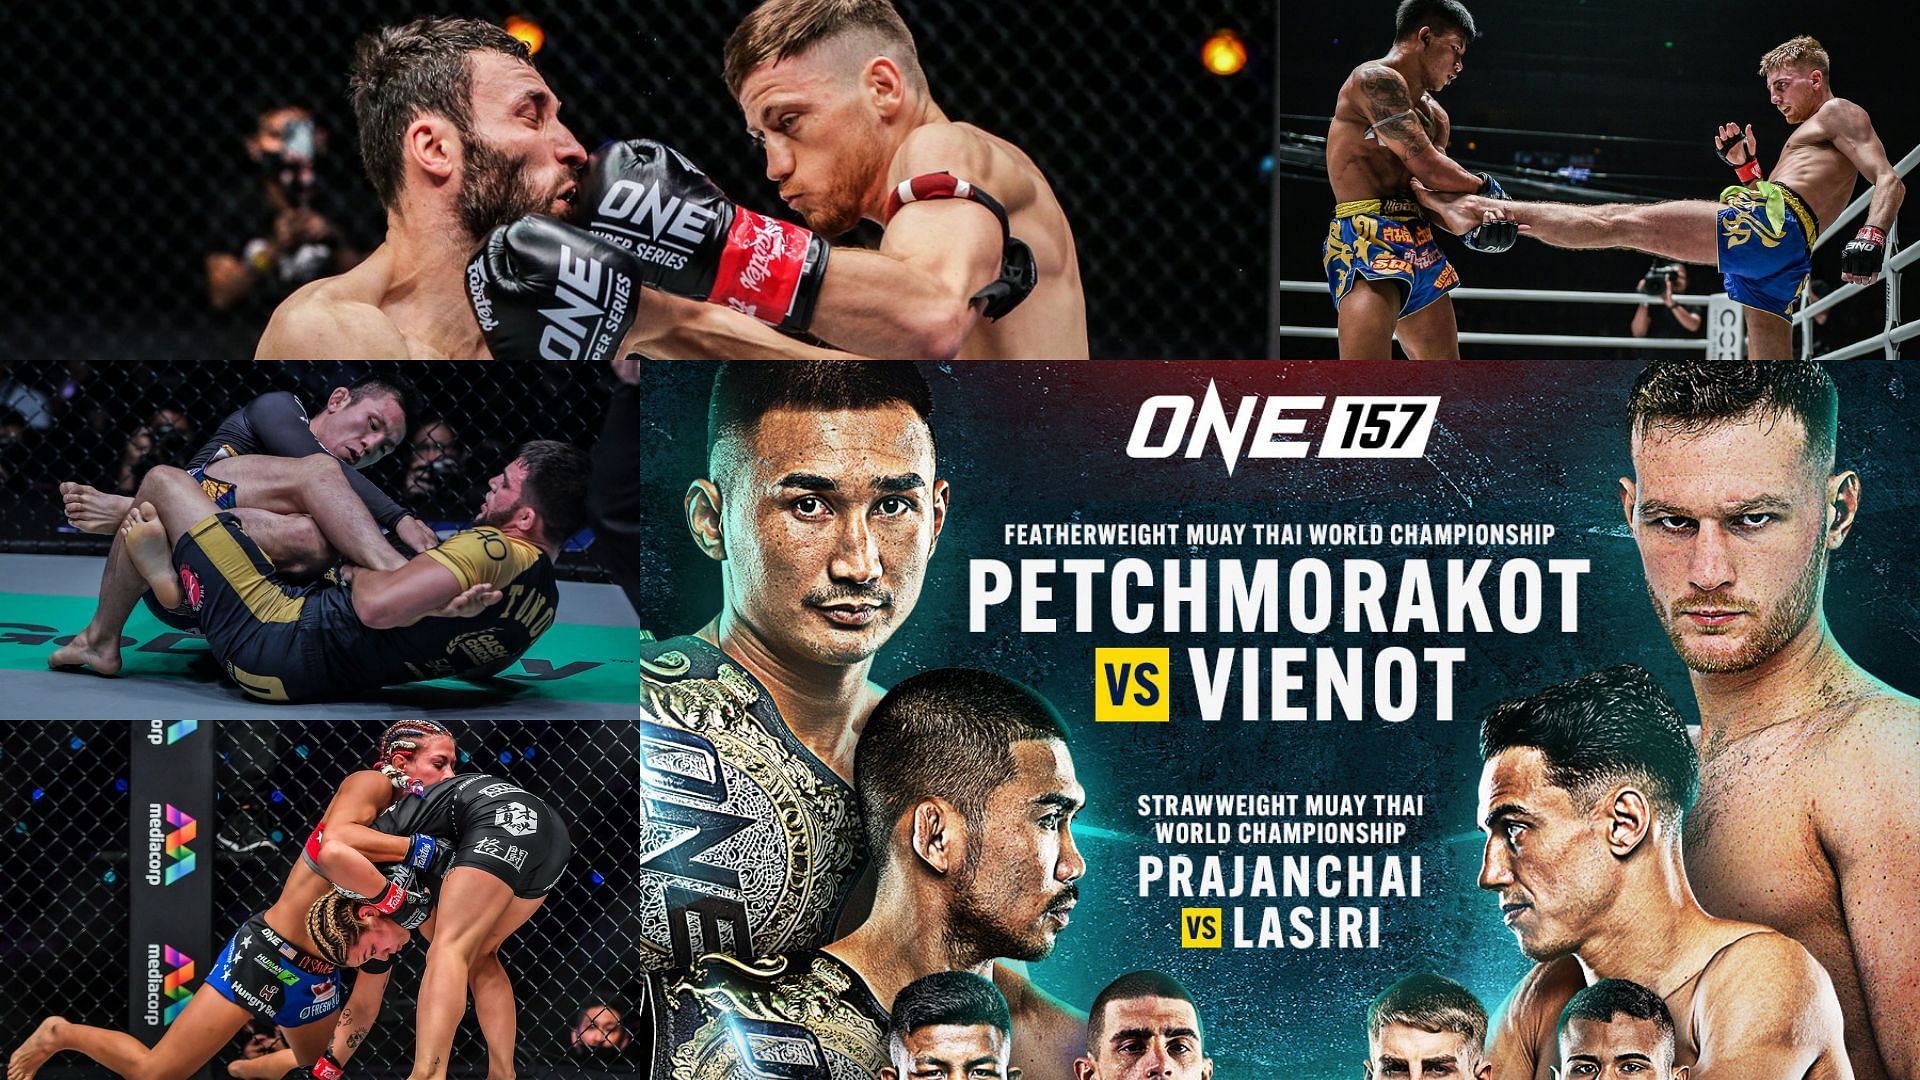 ONE Championship wants to know what you're stoked for at ONE 157